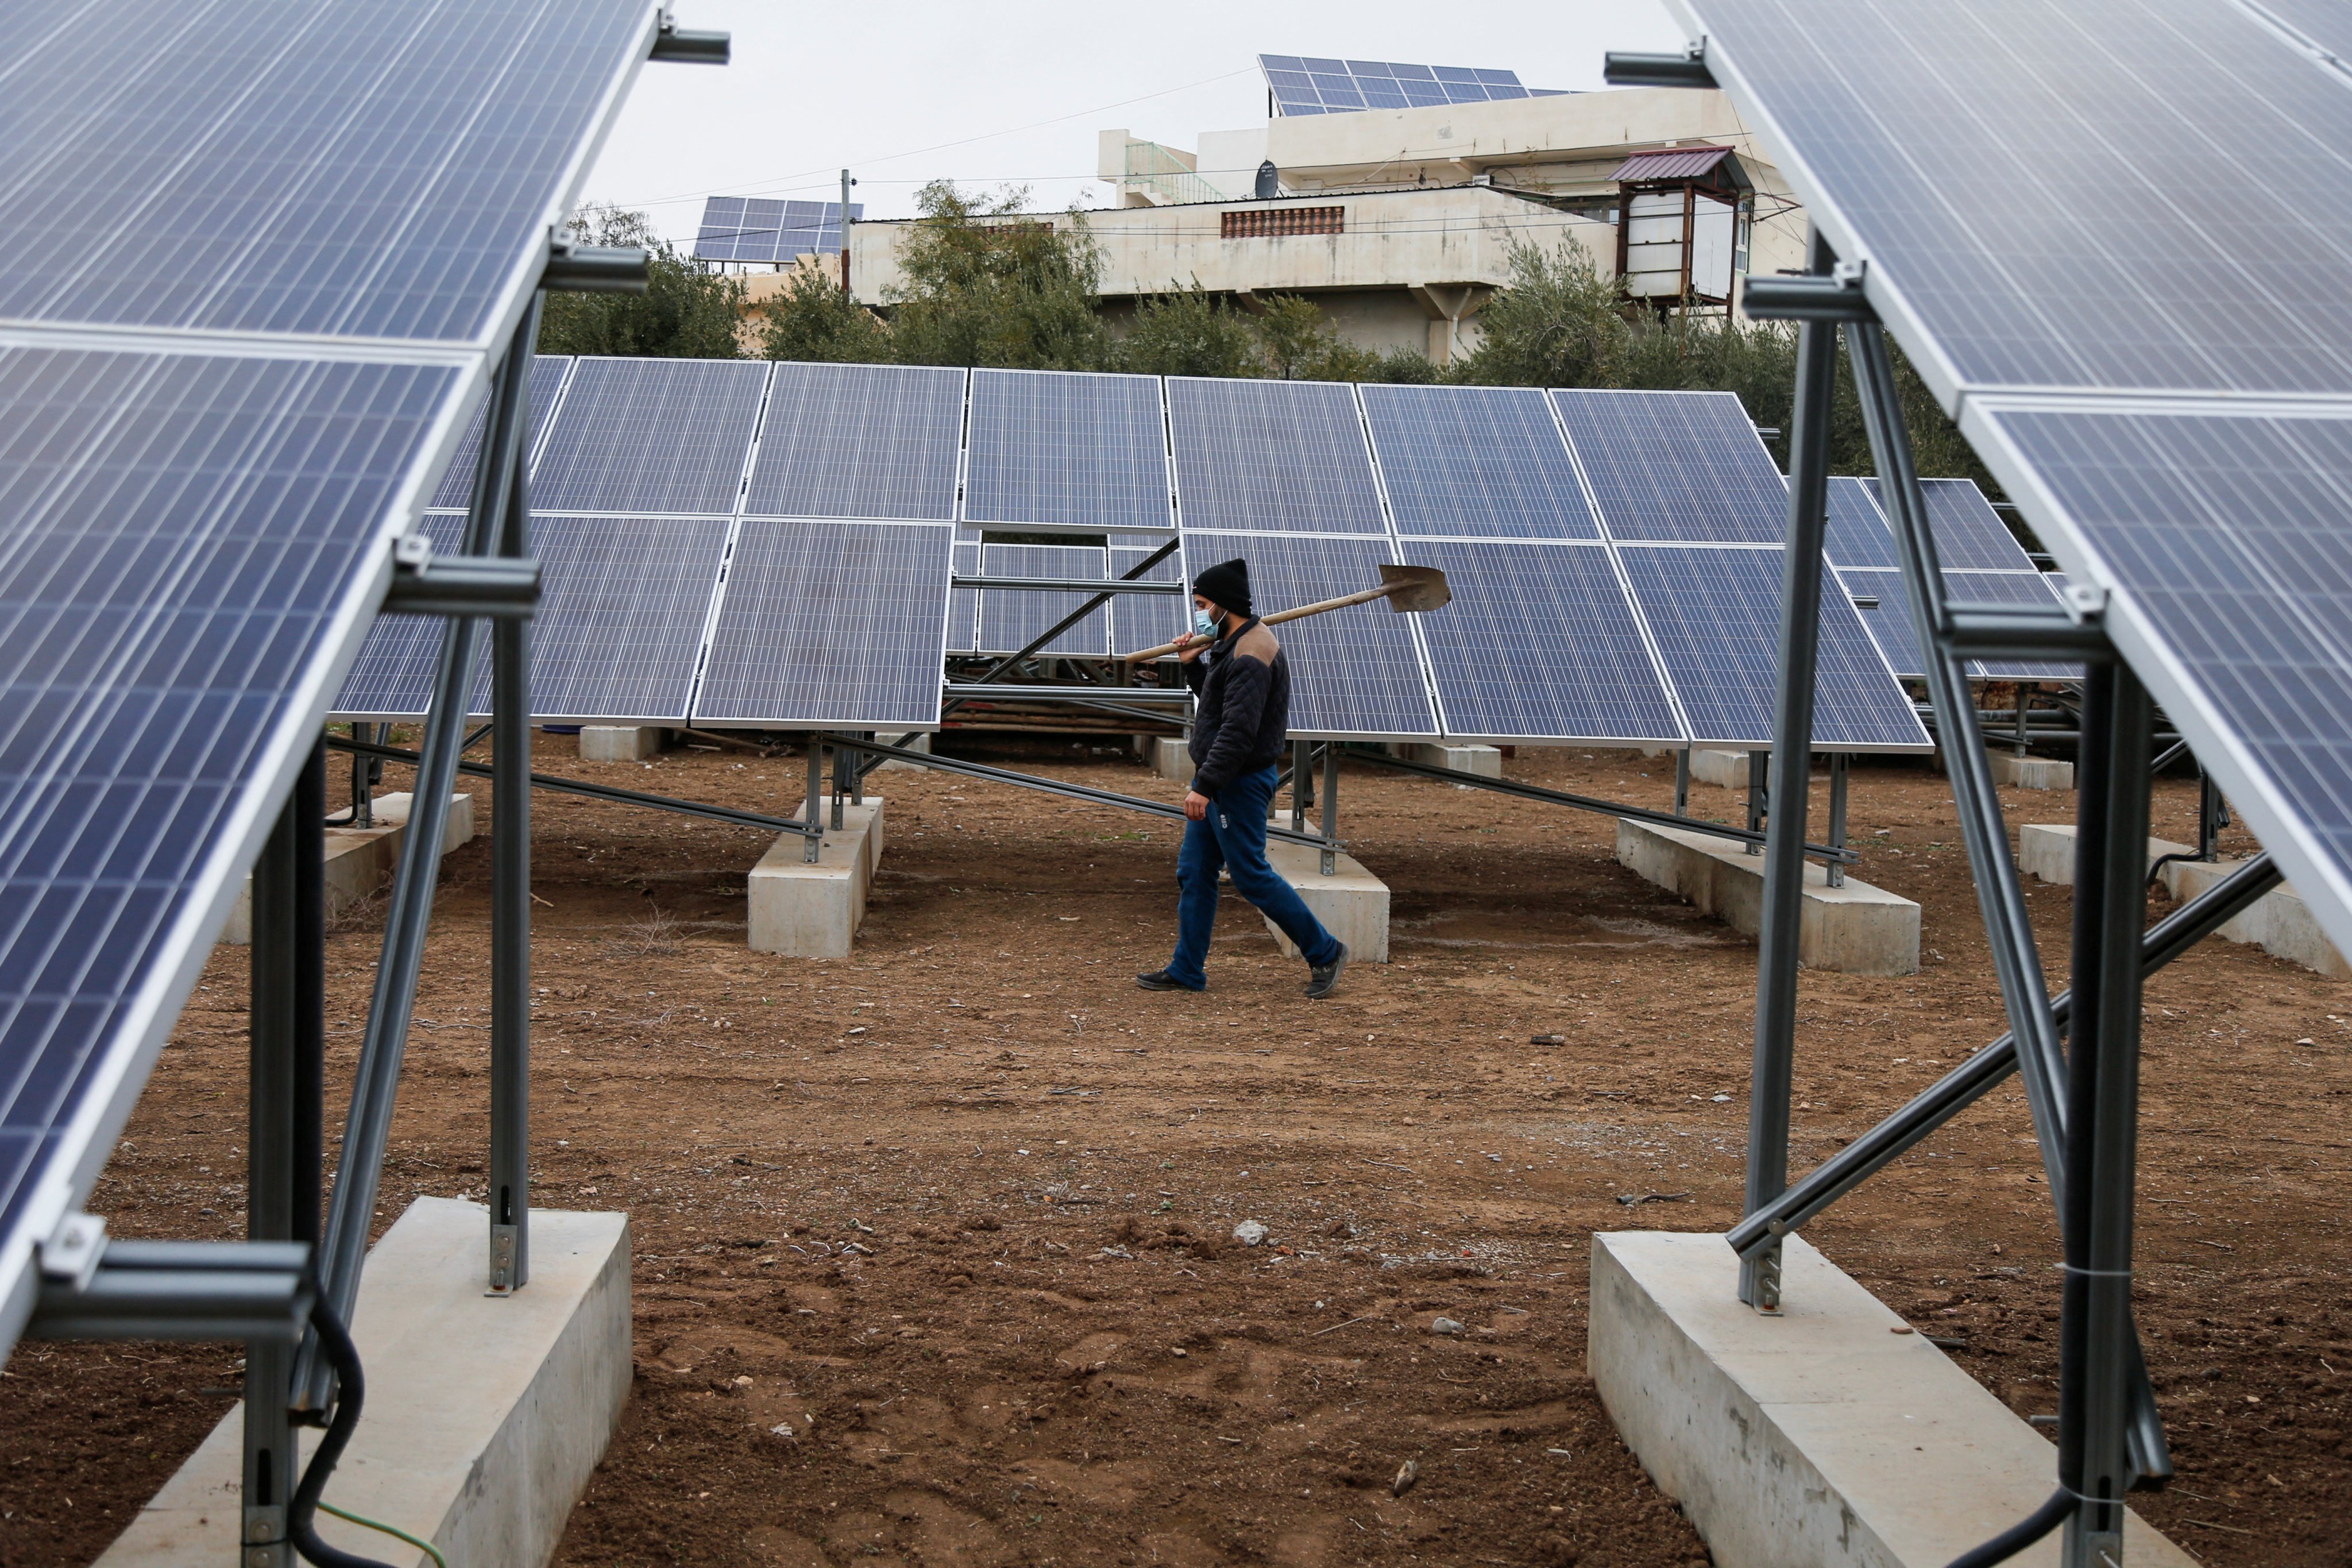 A worker walks near solar panels, which are one of the sustainable energy options that help olive farmers, in Mosul, Iraq on January 26. Asia is in dire need of green finance to fund its sustainable infrastructure projects. Photo: Reuters